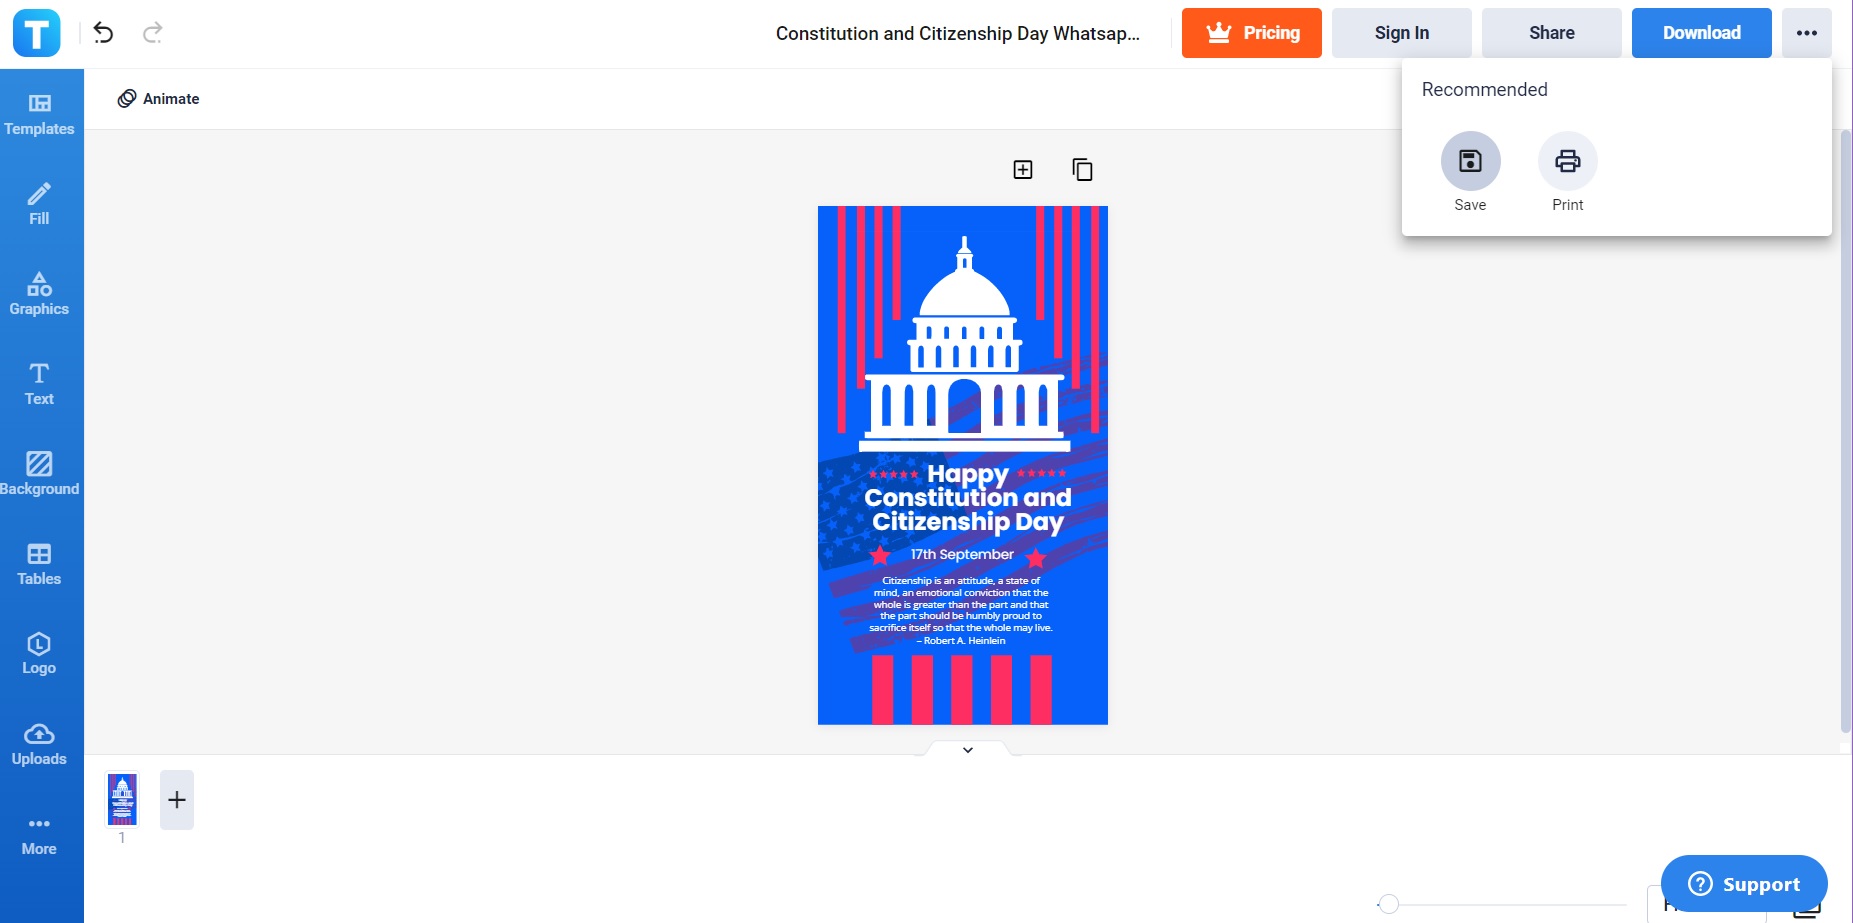 how to create a constitution citizenship day social media post step